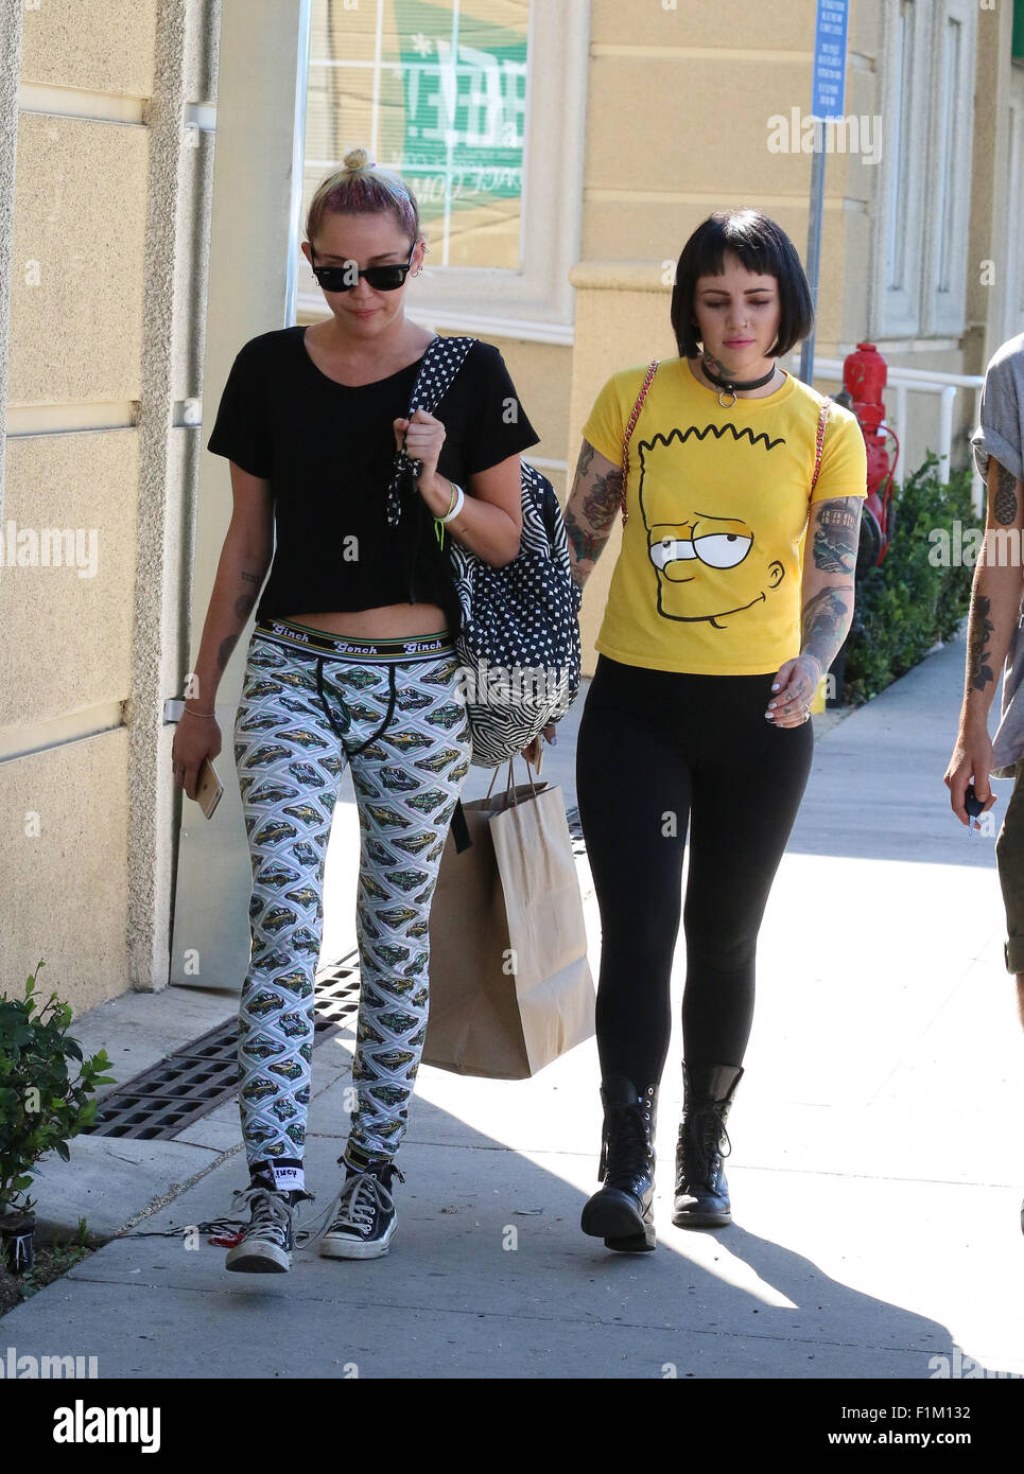 Picture of: Miley Cyrus spotted leaving a Mexican restaurant in Studio City